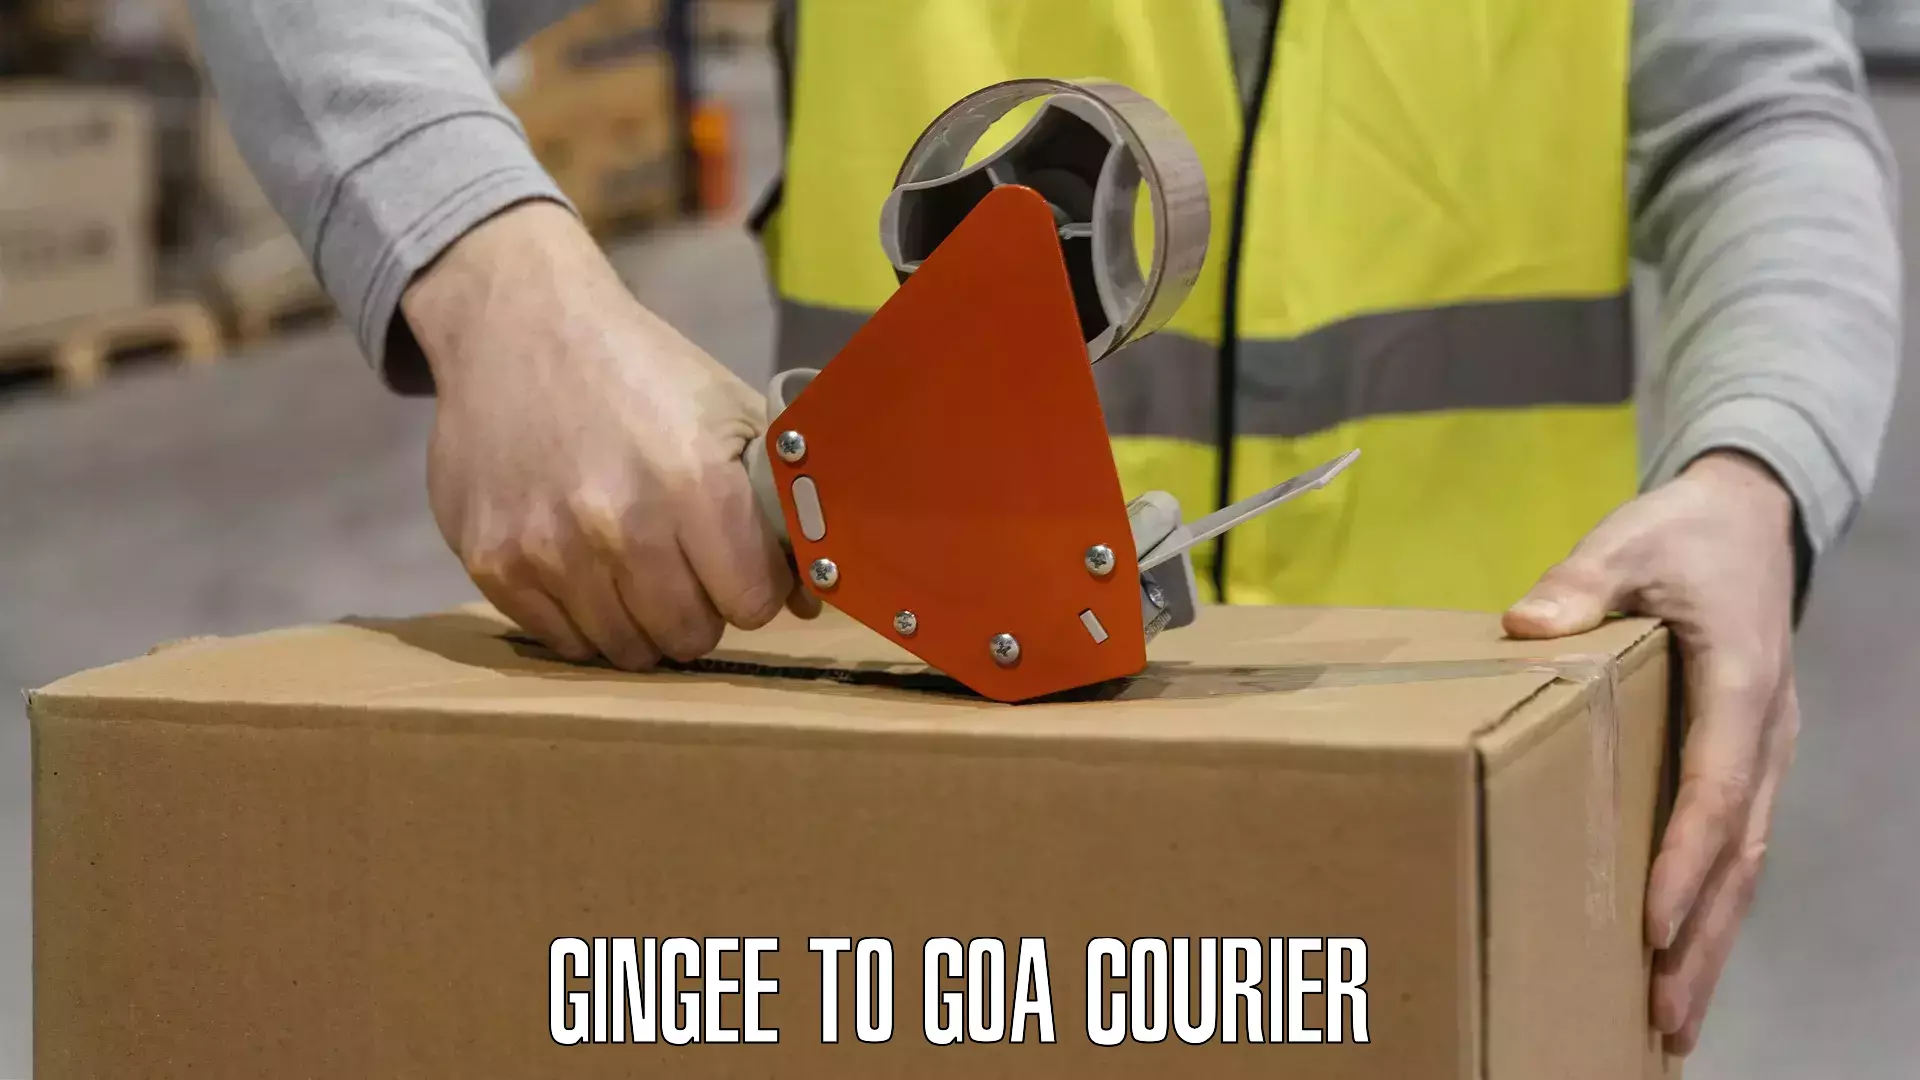 Reliable courier services Gingee to Goa